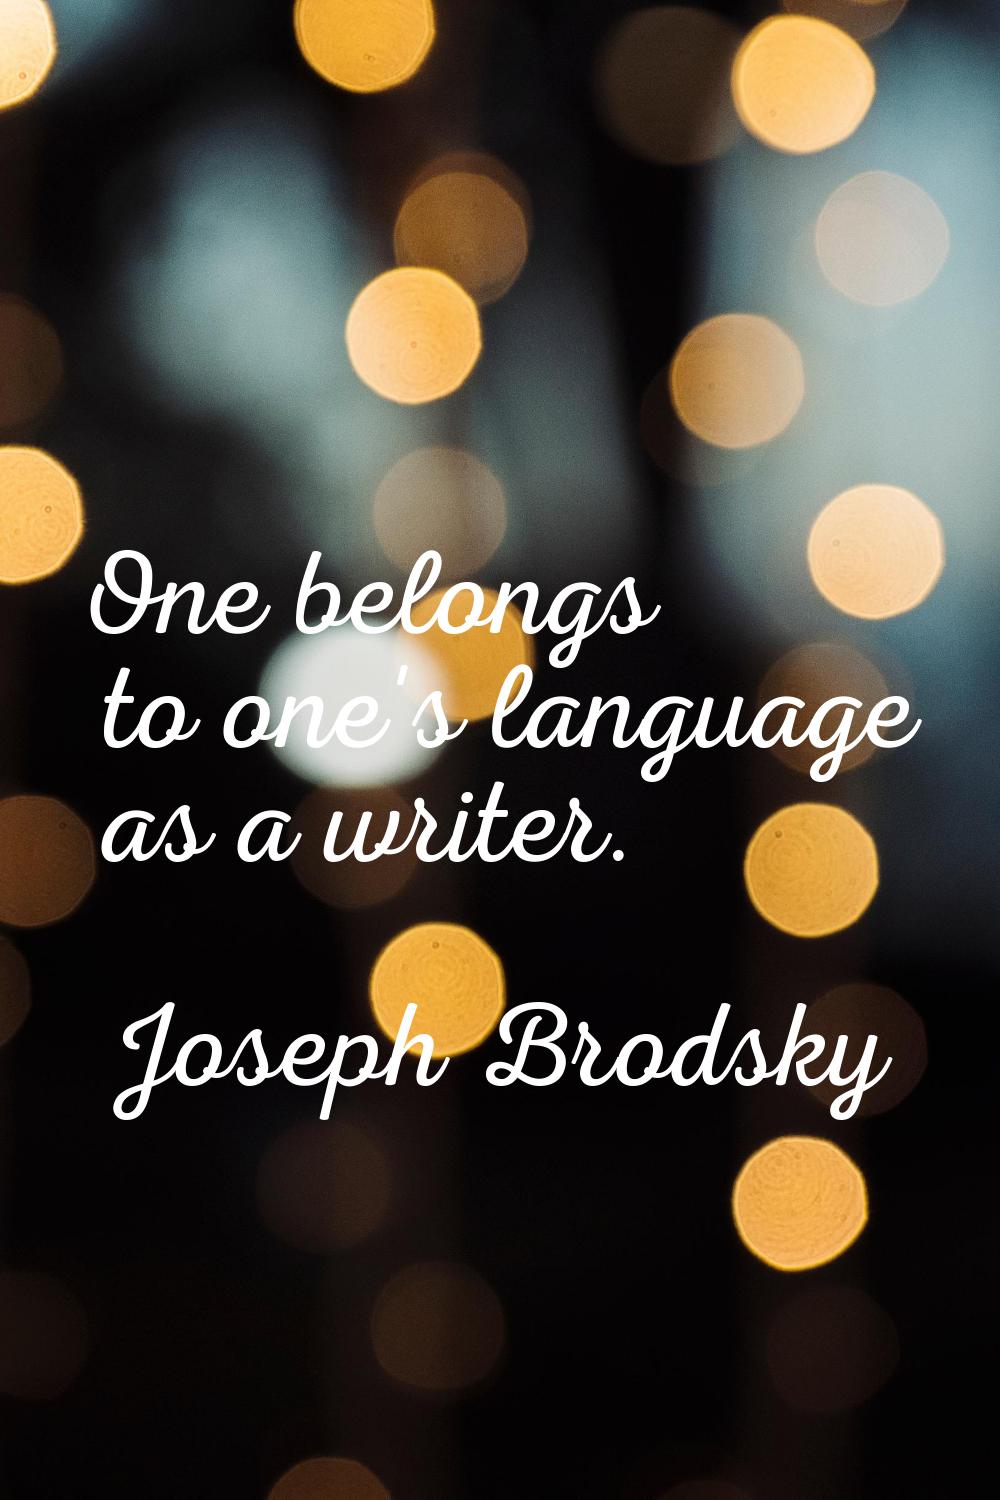 One belongs to one's language as a writer.